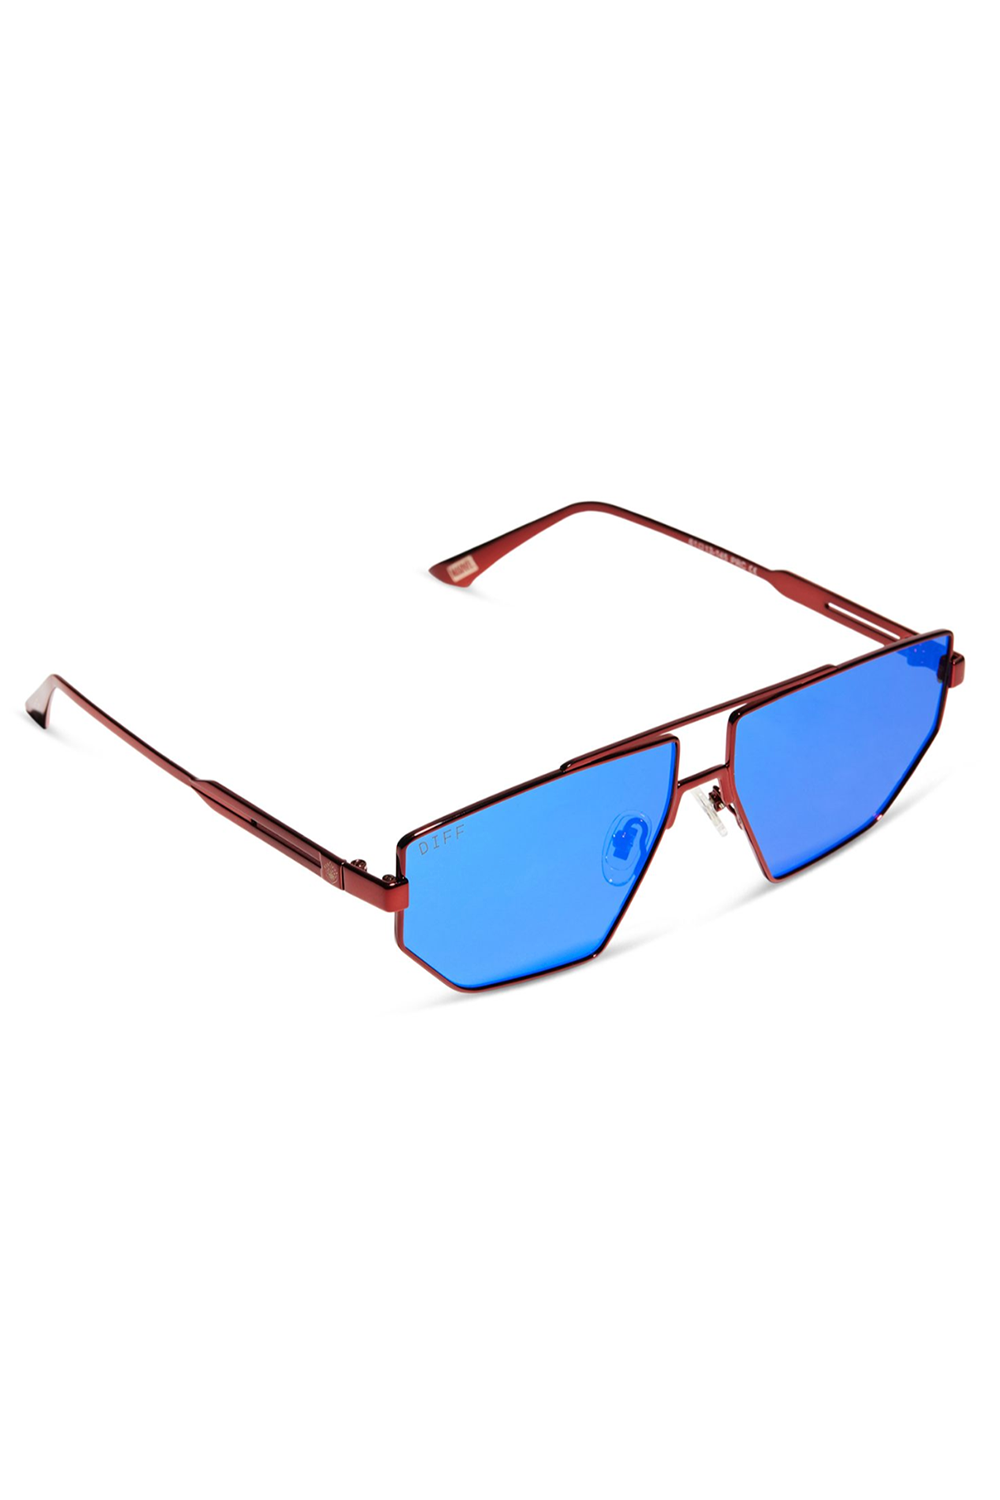 Galactic Heroes Sunglasses - Red & Blue